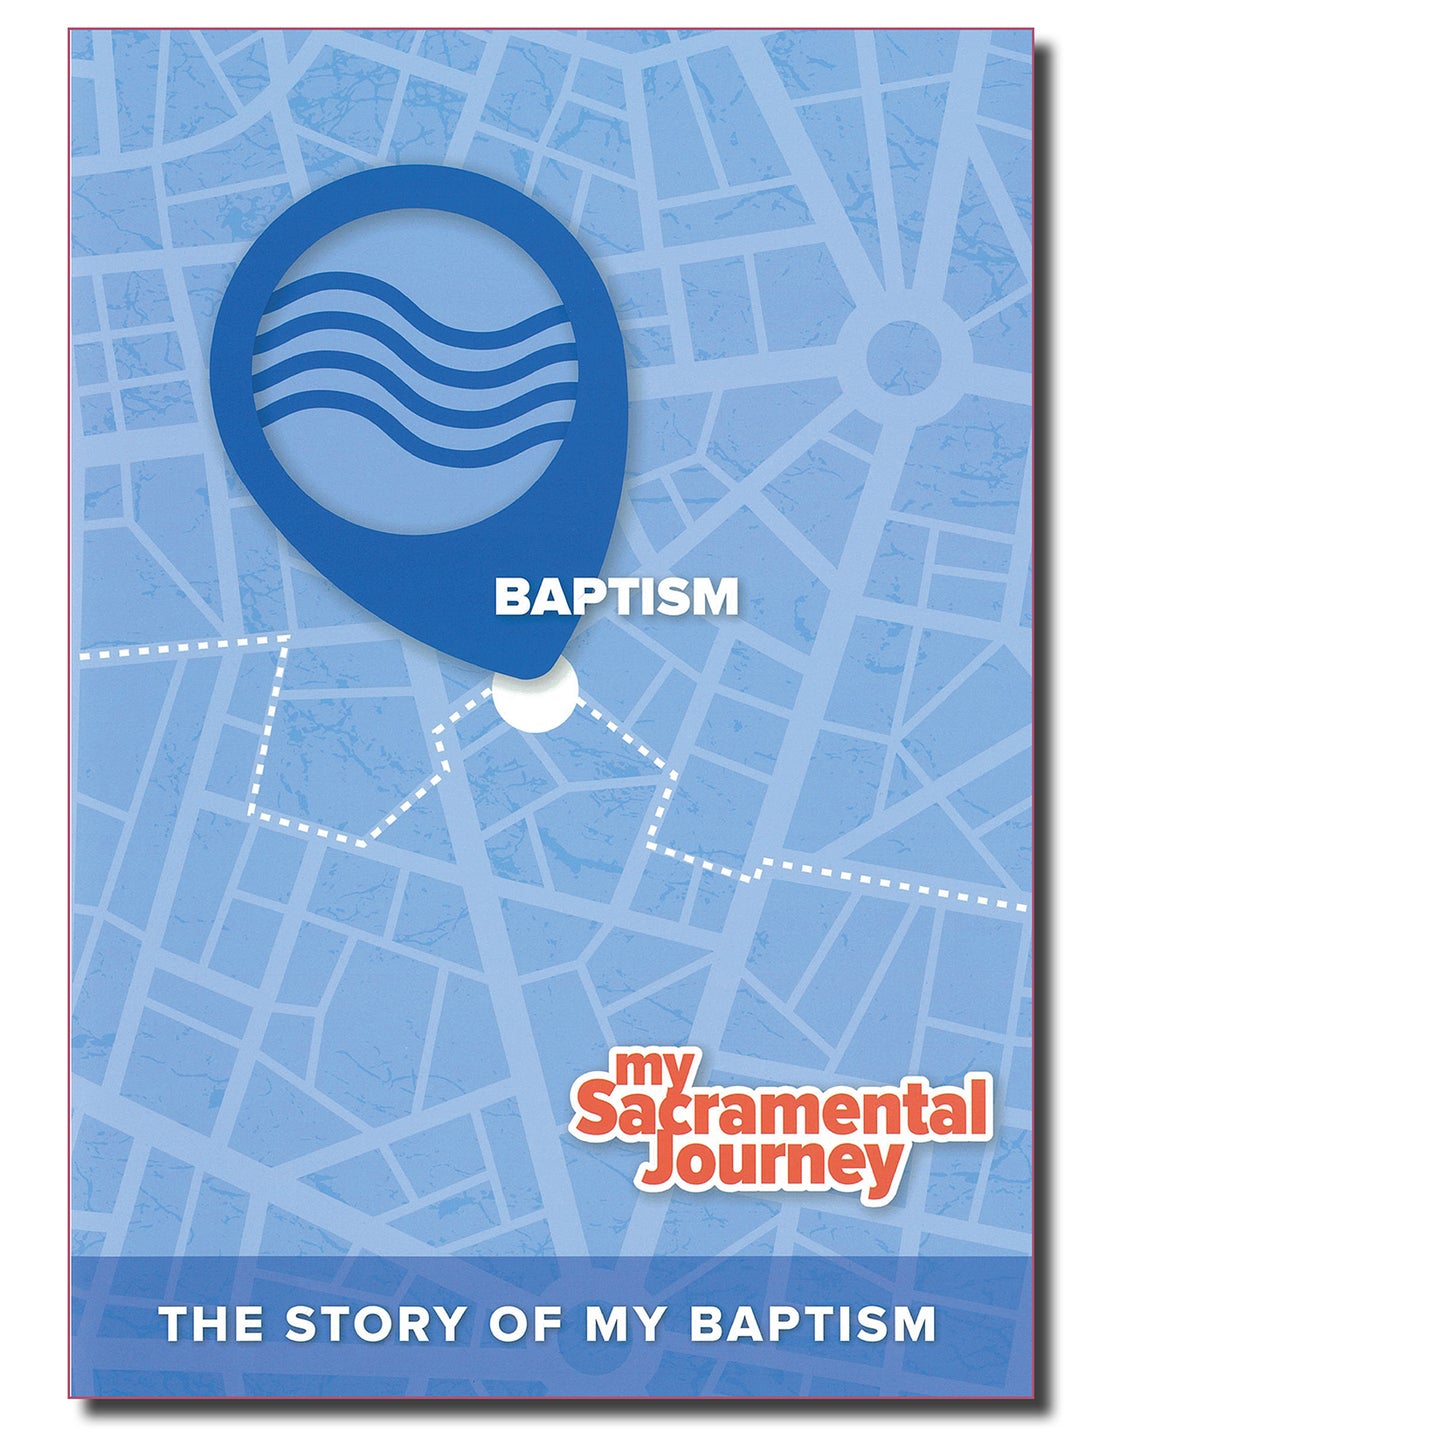 My Baptism: The Story of My Baptism